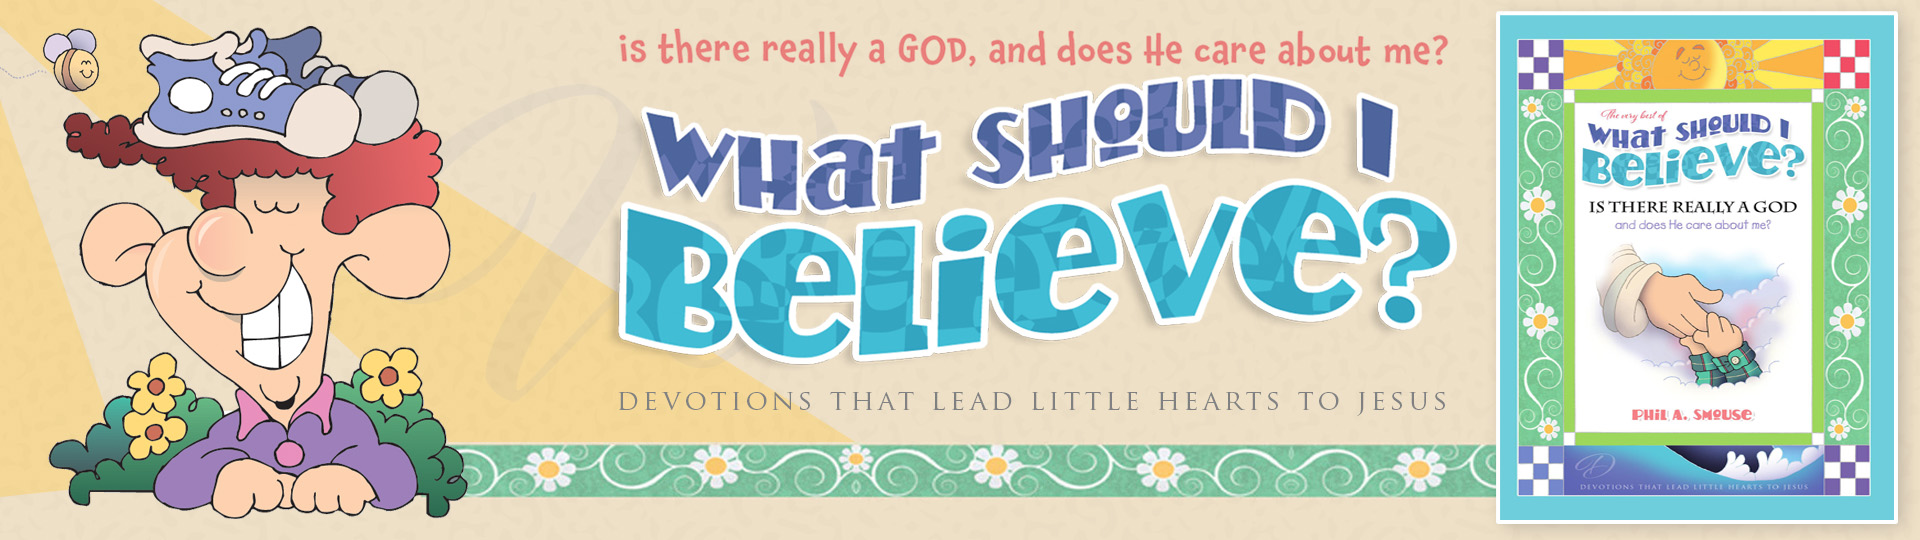 What Should I Believe? - Phil A. Smouse